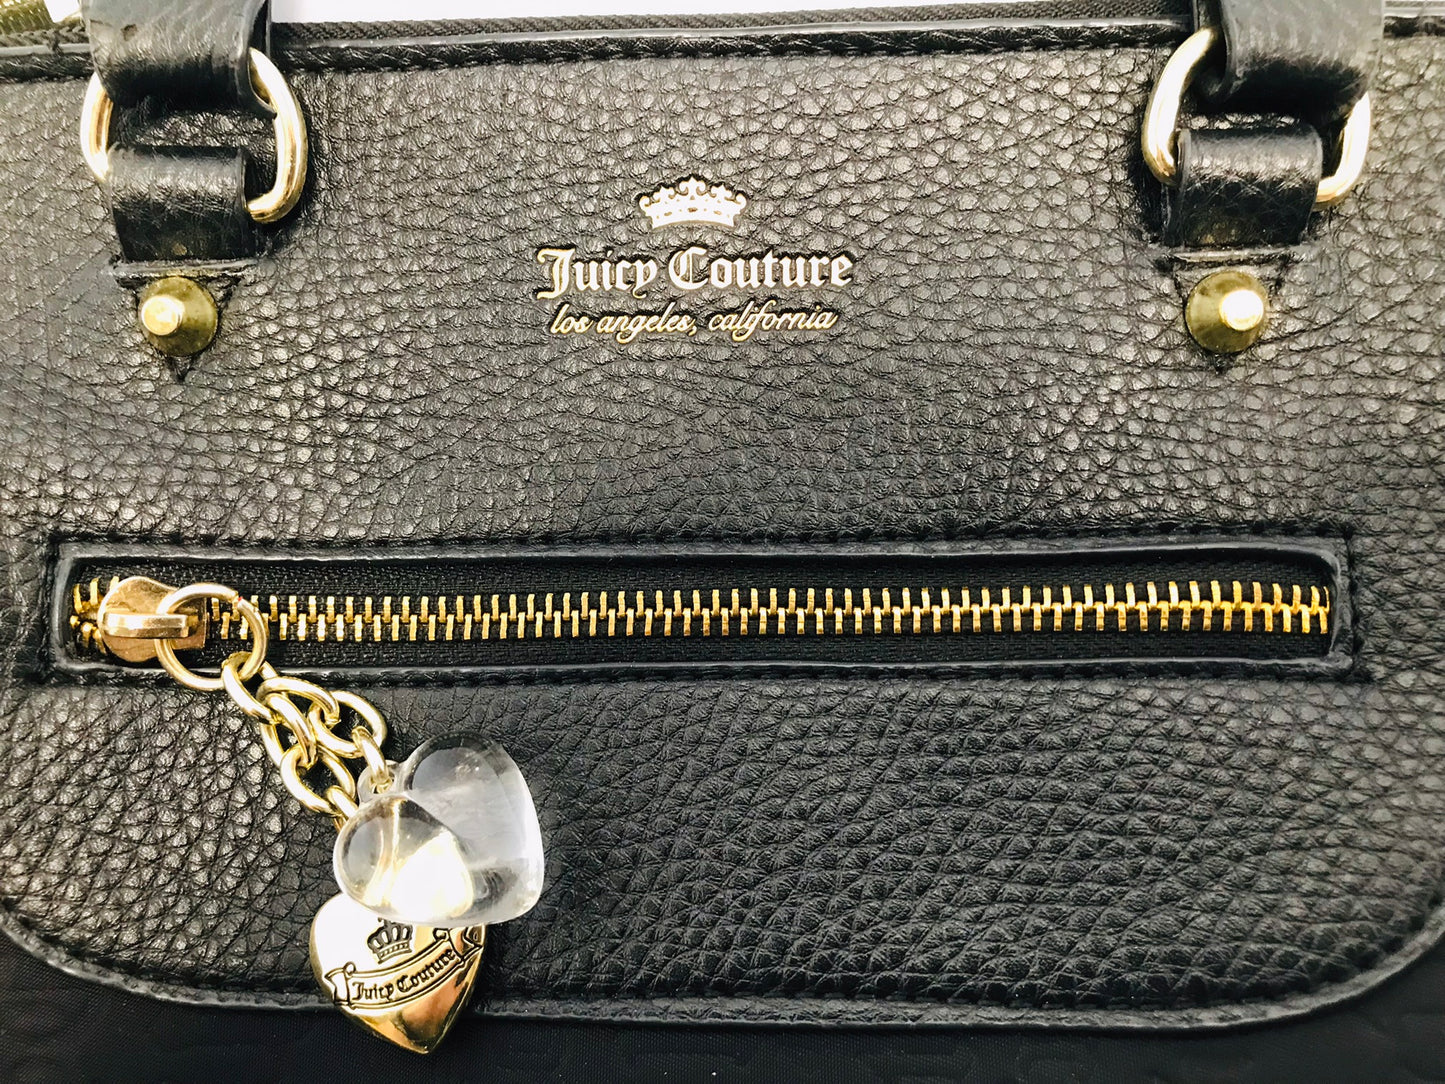 Purse Juicy Couture Black Gold Satchel With Strap Like New